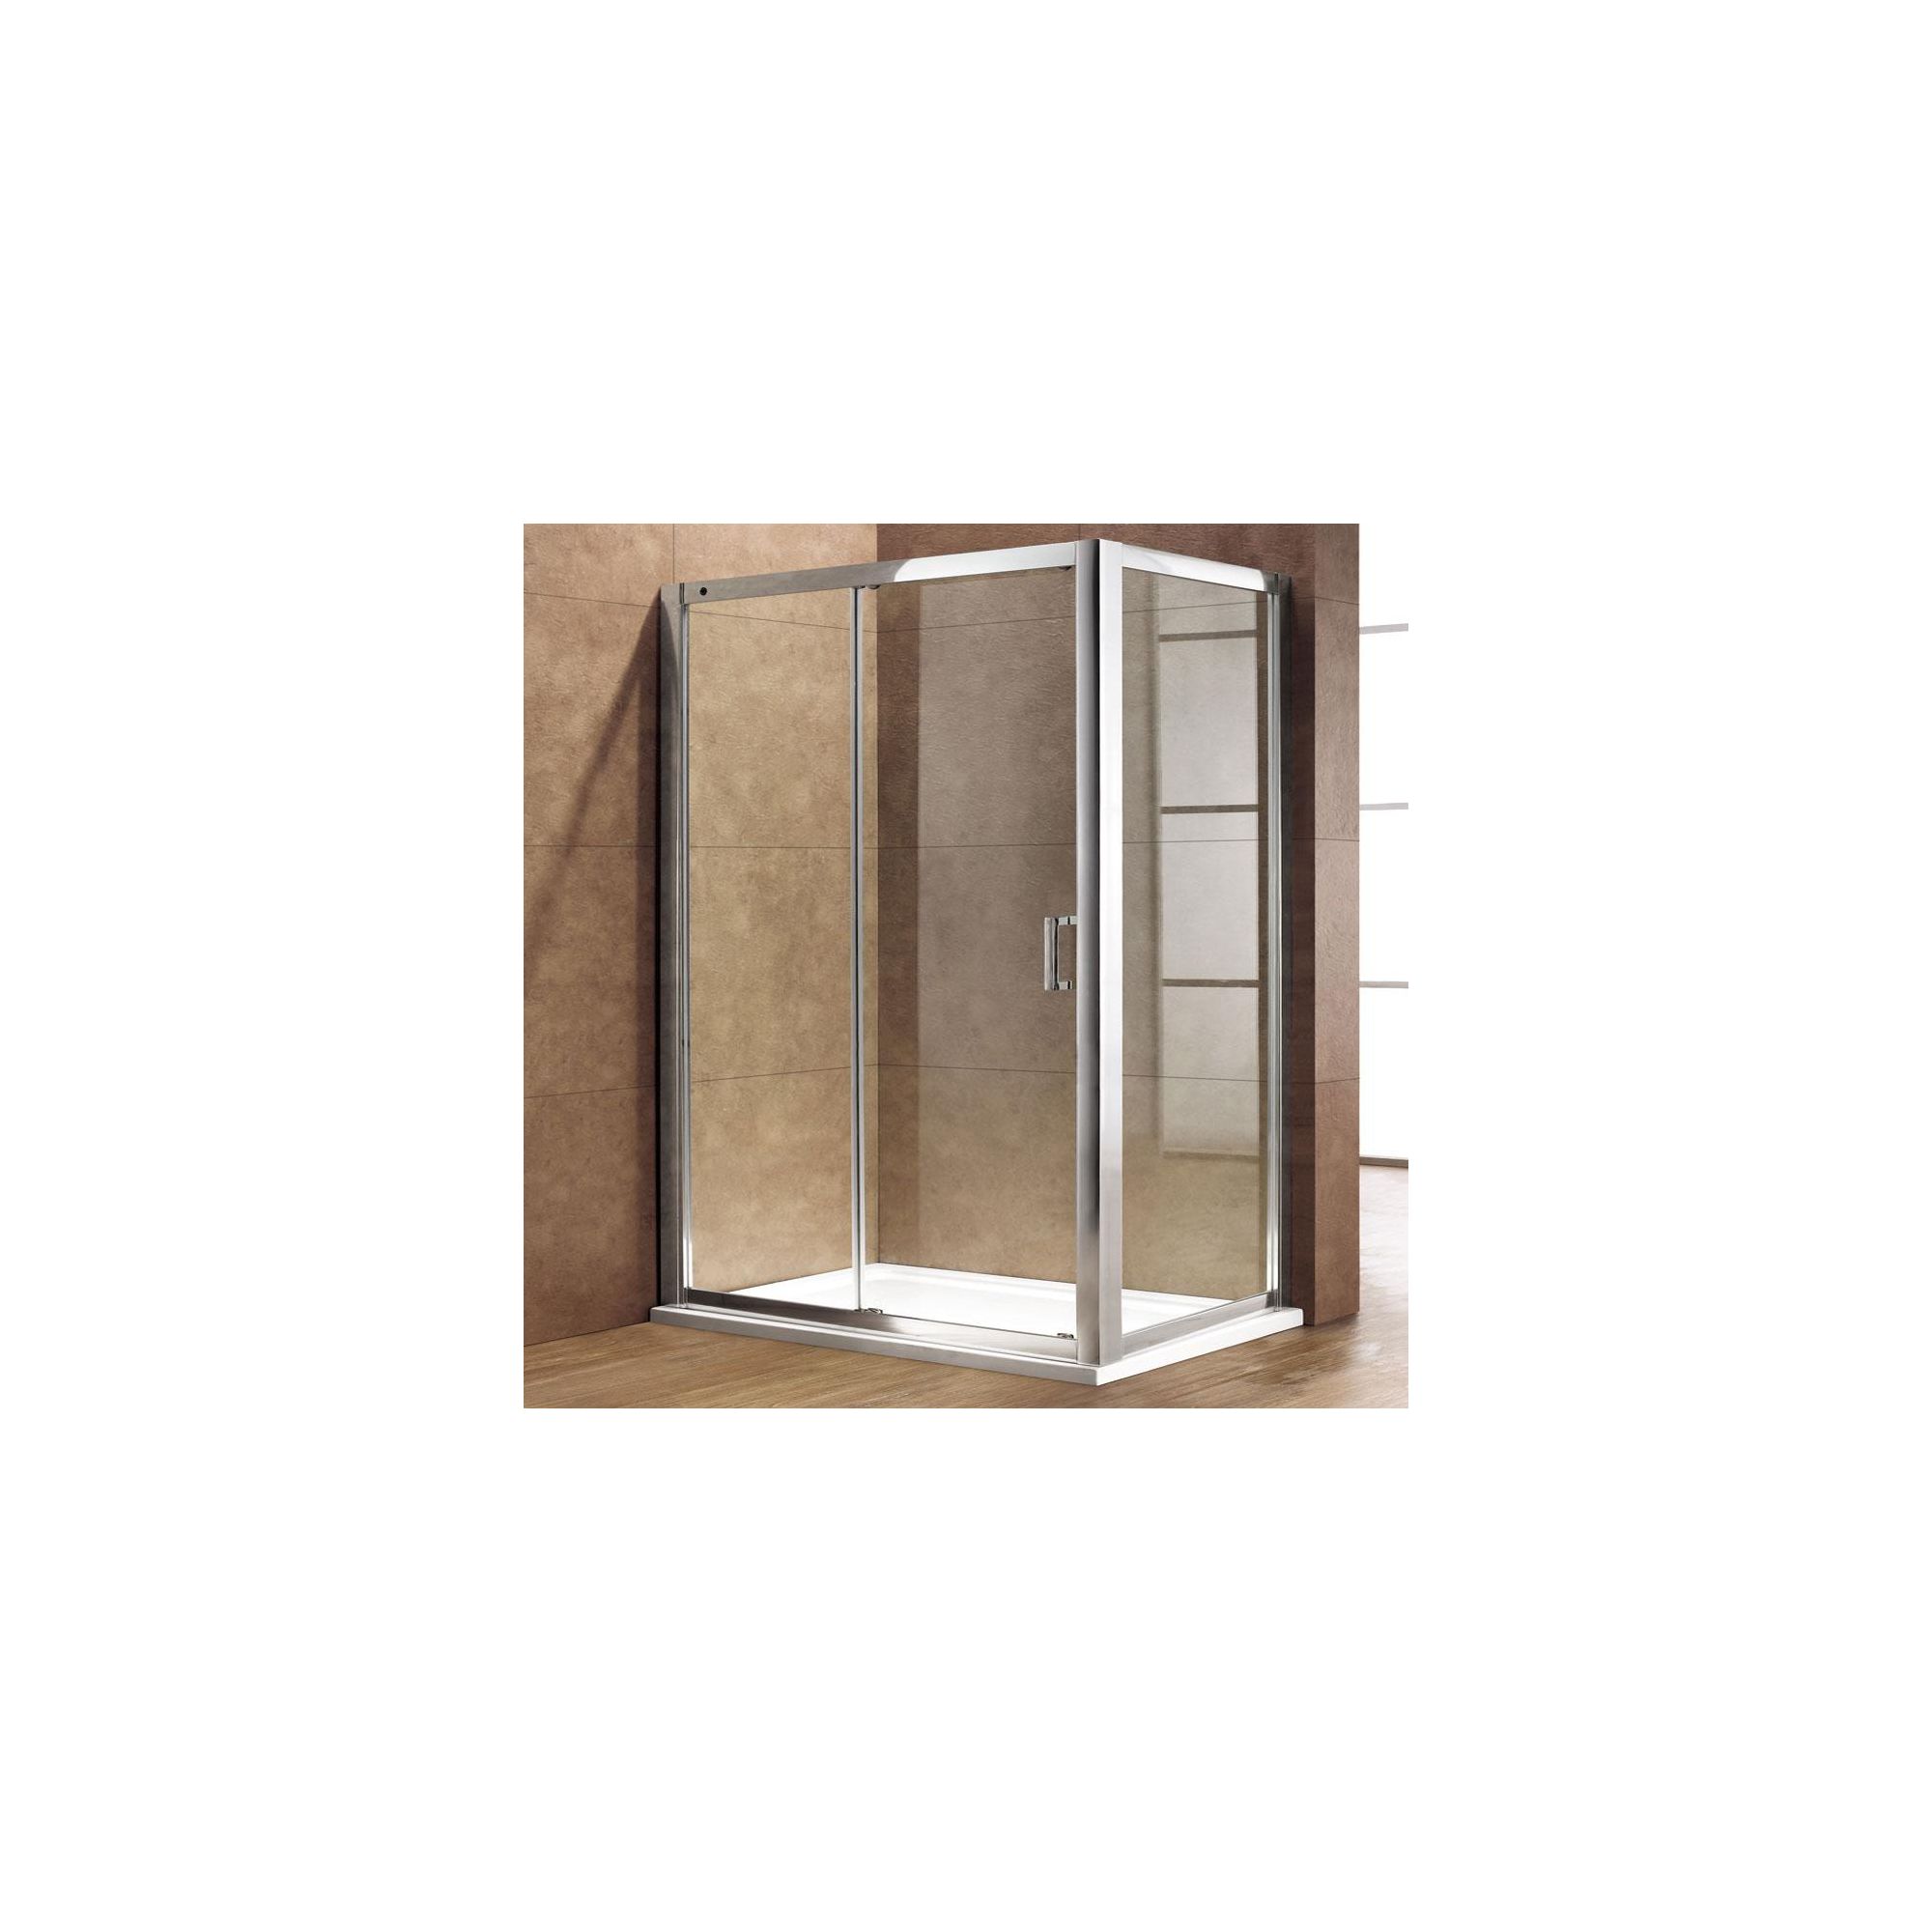 Duchy Premium Single Sliding Door Shower Enclosure, 1000mm x 800mm, 8mm Glass, Low Profile Tray at Tesco Direct